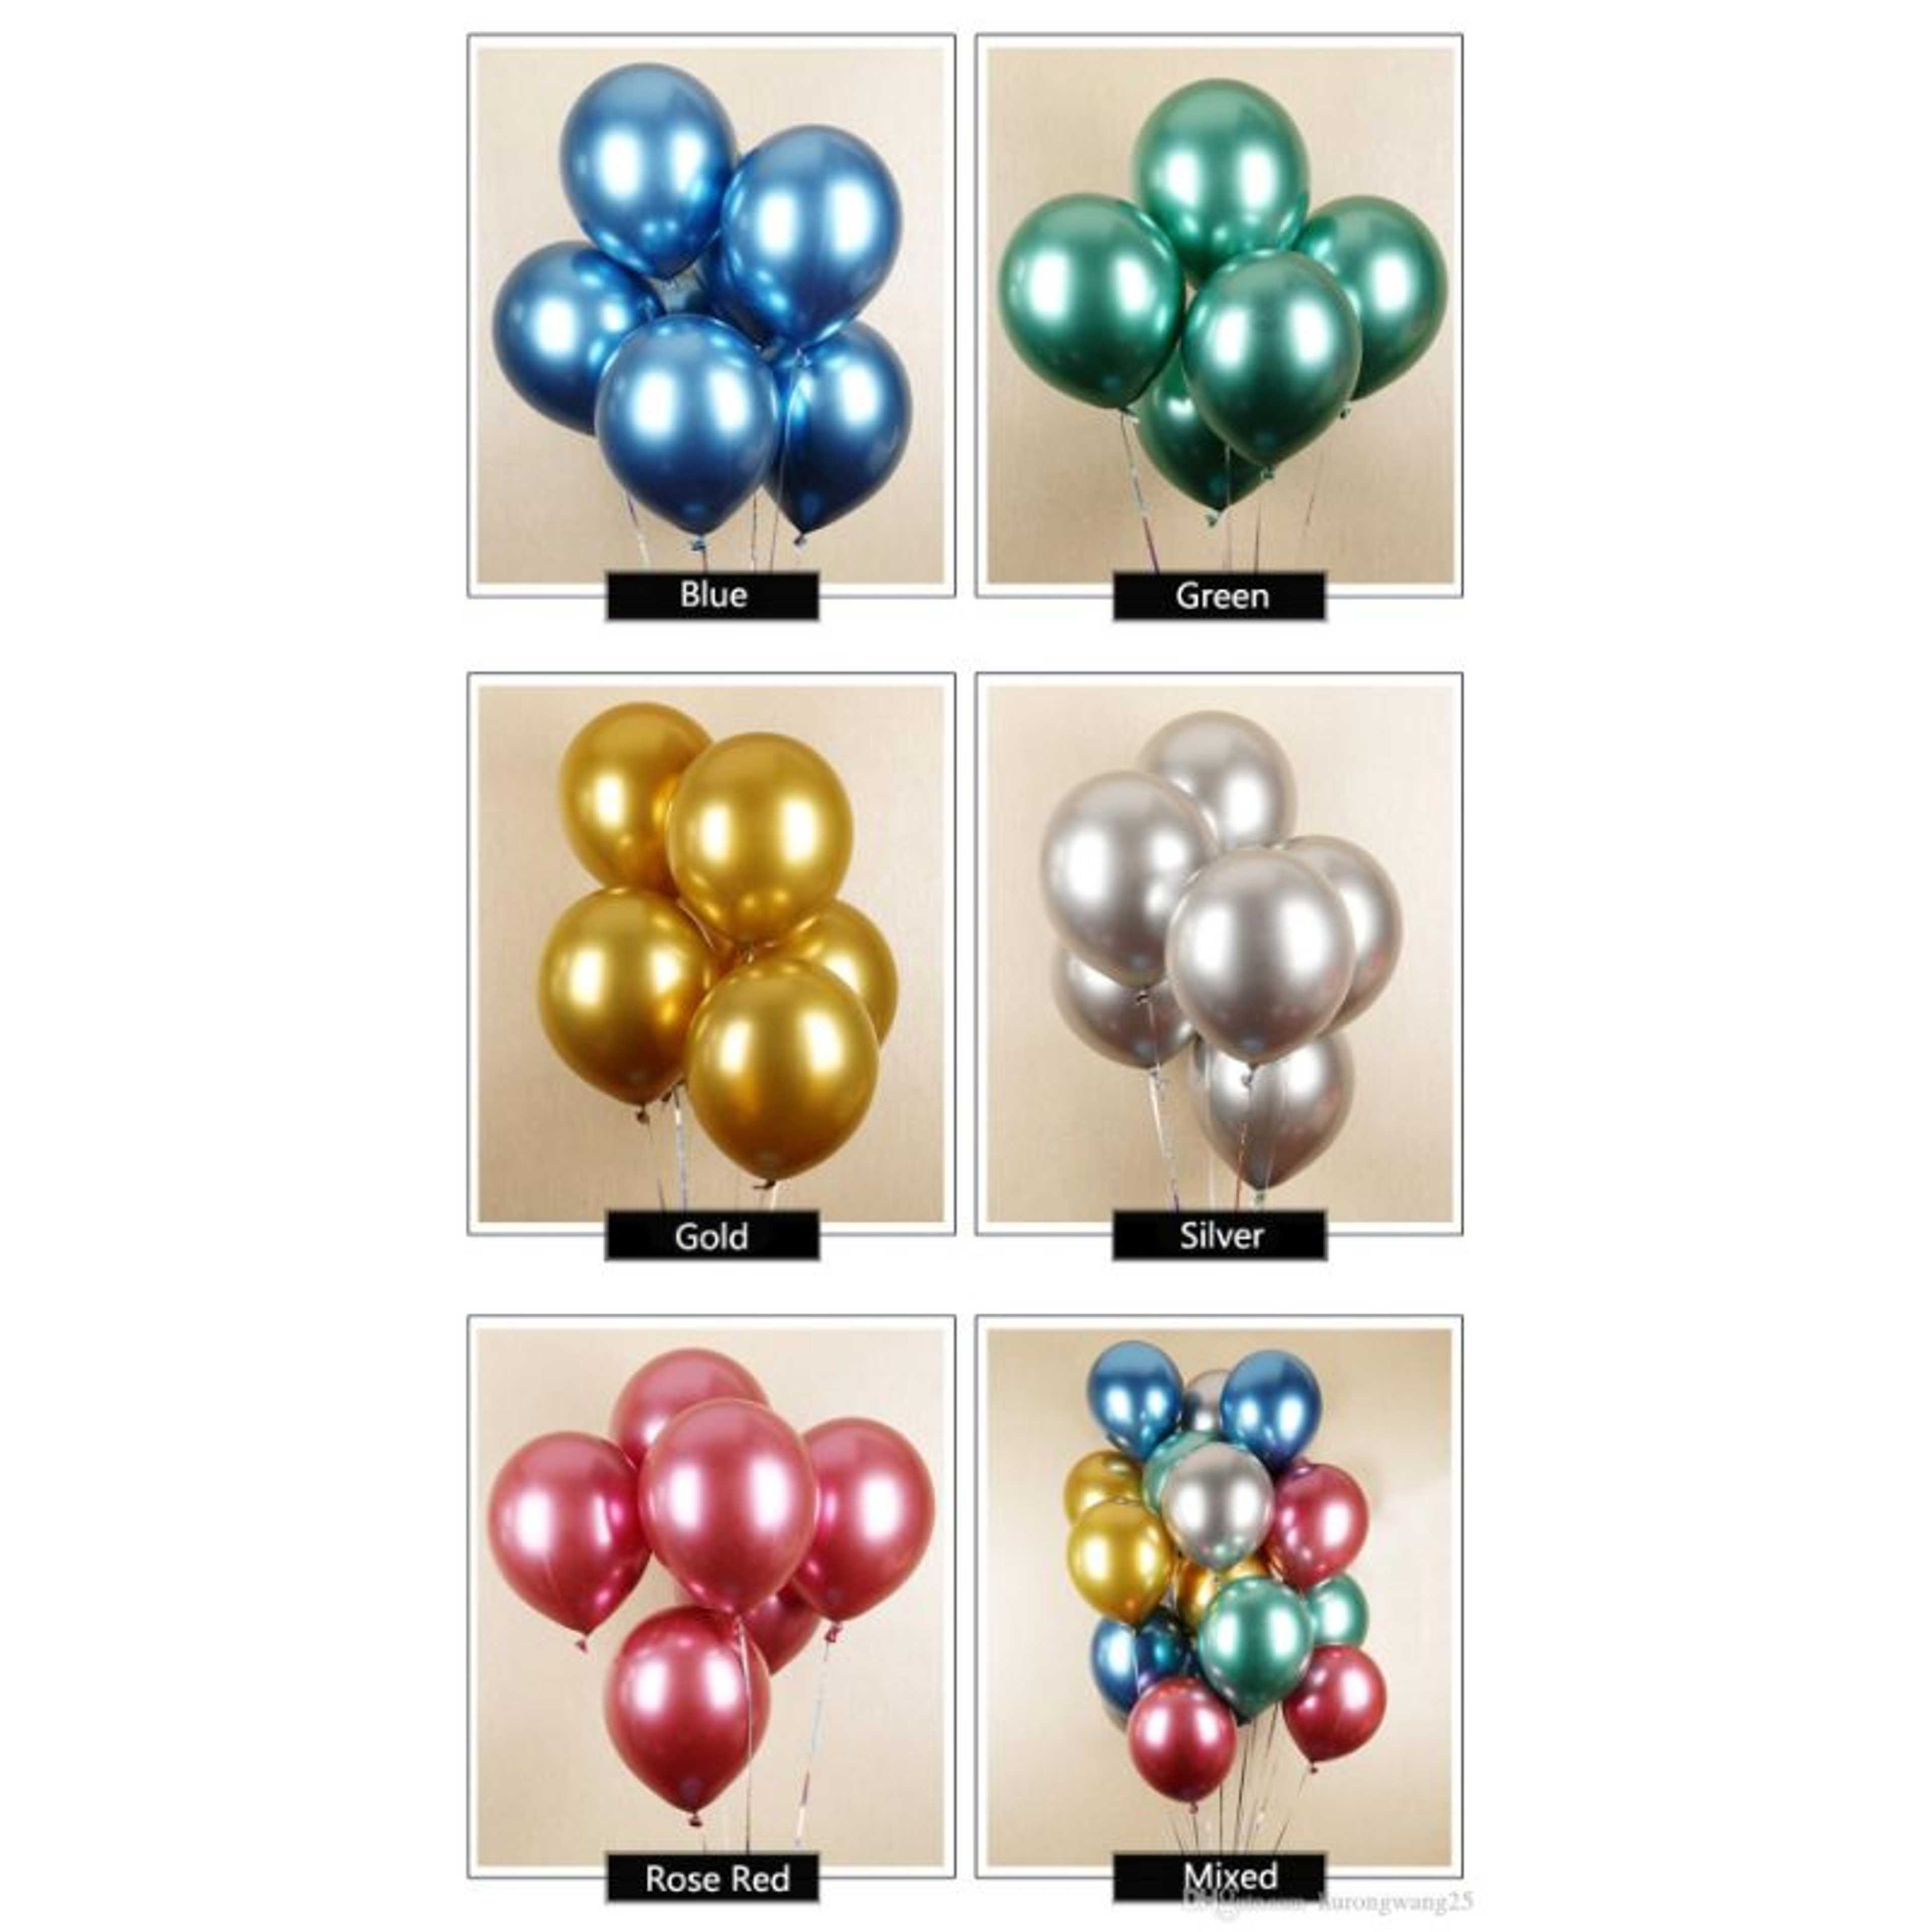 10 Large Metallic Chrome Balloons Pack of 10 Pieces Price is Per Pack Select Your Colour From Variation Box And Place the order